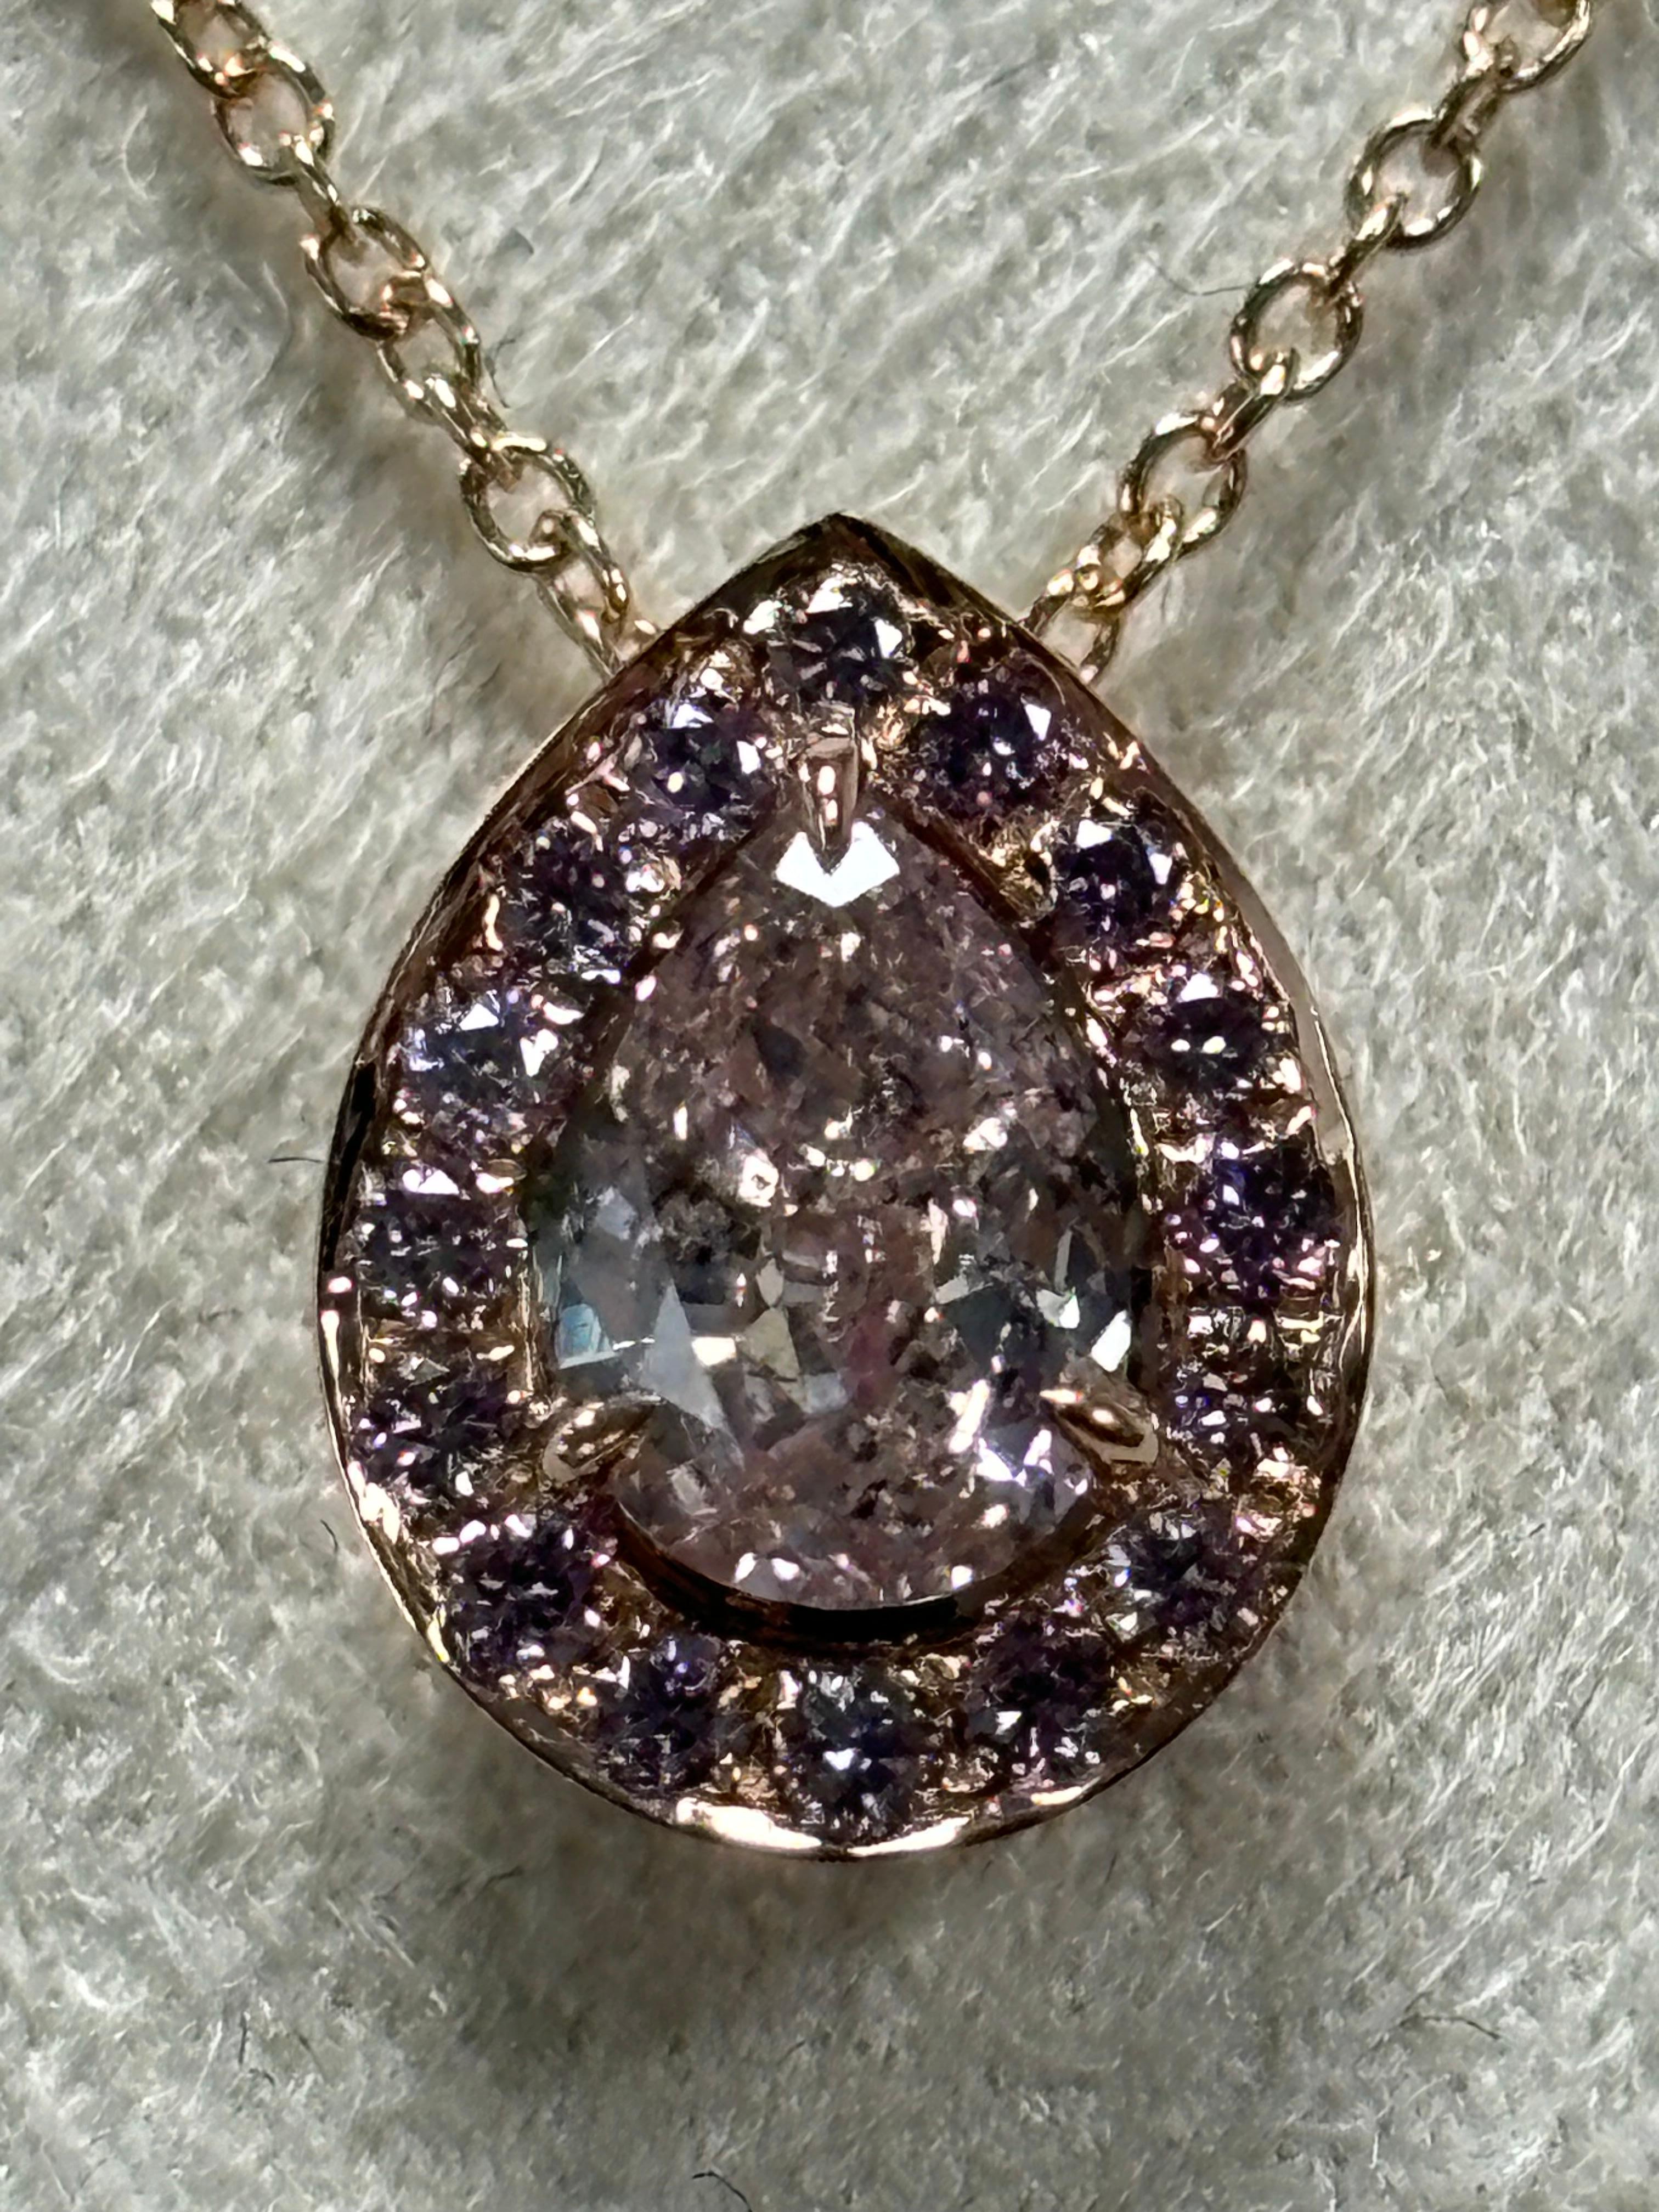 We are natural diamond production company located in Dubai.
This stunning natural 0.50  ct Pera Shape Fancy Brown-Pink diamond pendant necklace is crafted in 18k Rose Gold surrounding and set in chain with Fancy Intense Pink Round Shape diamonds (25